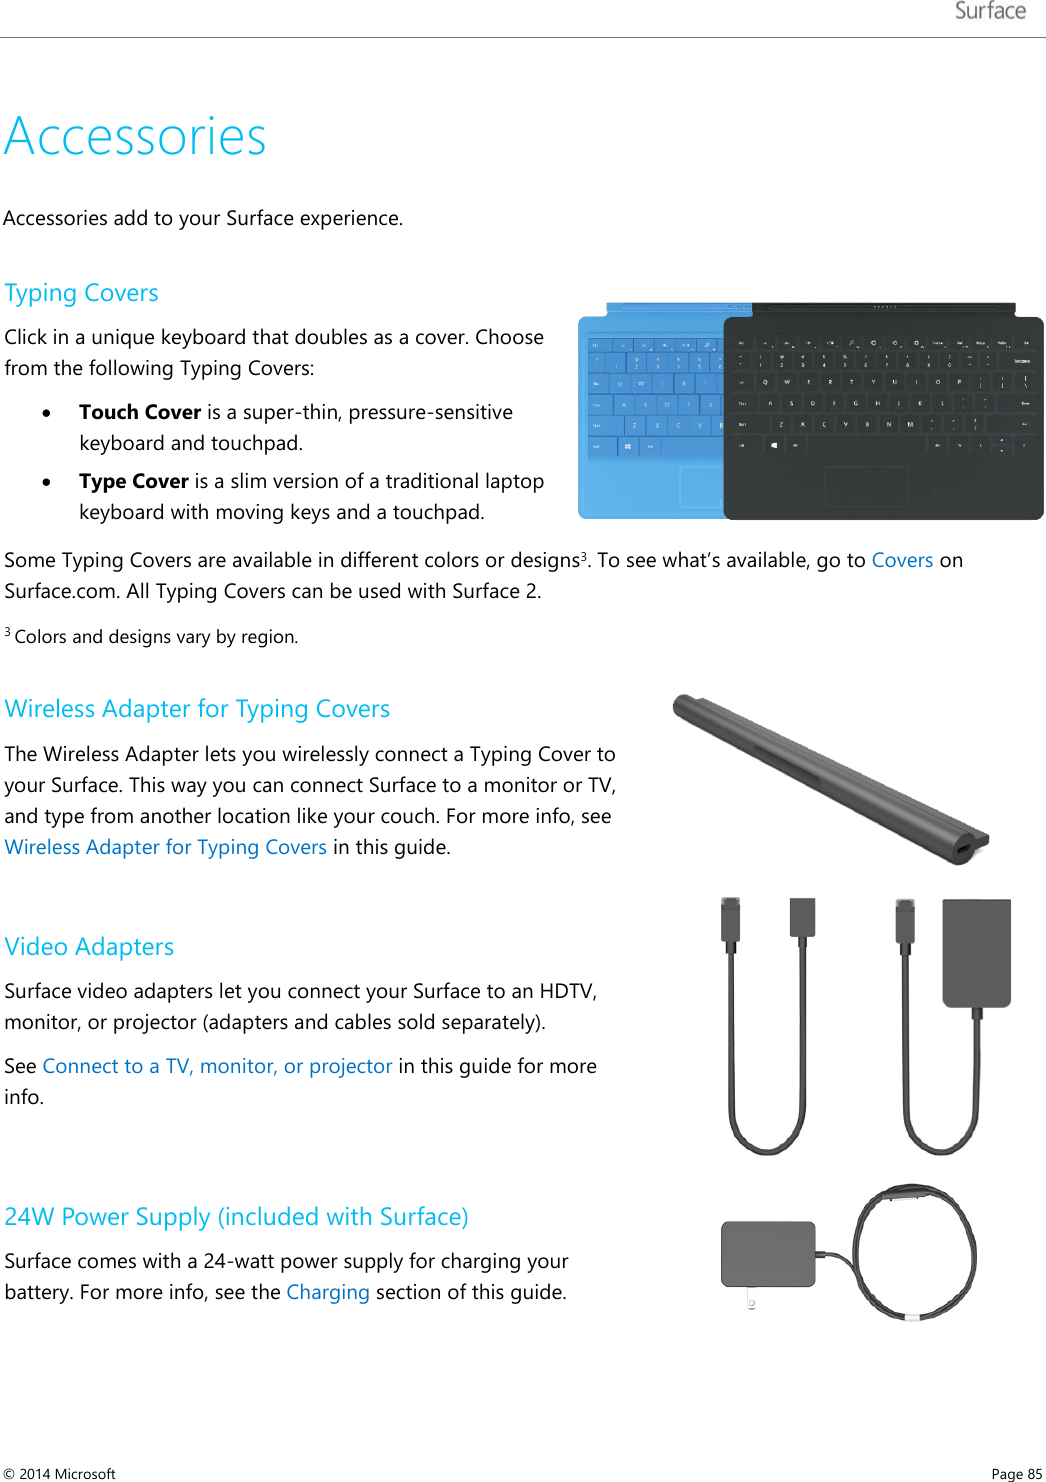   Accessories Accessories add to your Surface experience.  Typing Covers Click in a unique keyboard that doubles as a cover. Choose from the following Typing Covers: • Touch Cover is a super-thin, pressure-sensitive keyboard and touchpad.  • Type Cover is a slim version of a traditional laptop keyboard with moving keys and a touchpad.   Some Typing Covers are available in different colors or designs3. To see what’s available, go to Covers on Surface.com. All Typing Covers can be used with Surface 2.  3 Colors and designs vary by region. Wireless Adapter for Typing Covers The Wireless Adapter lets you wirelessly connect a Typing Cover to your Surface. This way you can connect Surface to a monitor or TV, and type from another location like your couch. For more info, see Wireless Adapter for Typing Covers in this guide.  Video Adapters Surface video adapters let you connect your Surface to an HDTV, monitor, or projector (adapters and cables sold separately).  See Connect to a TV, monitor, or projector in this guide for more info.  24W Power Supply (included with Surface) Surface comes with a 24-watt power supply for charging your battery. For more info, see the Charging section of this guide.  © 2014 Microsoft     Page 85  